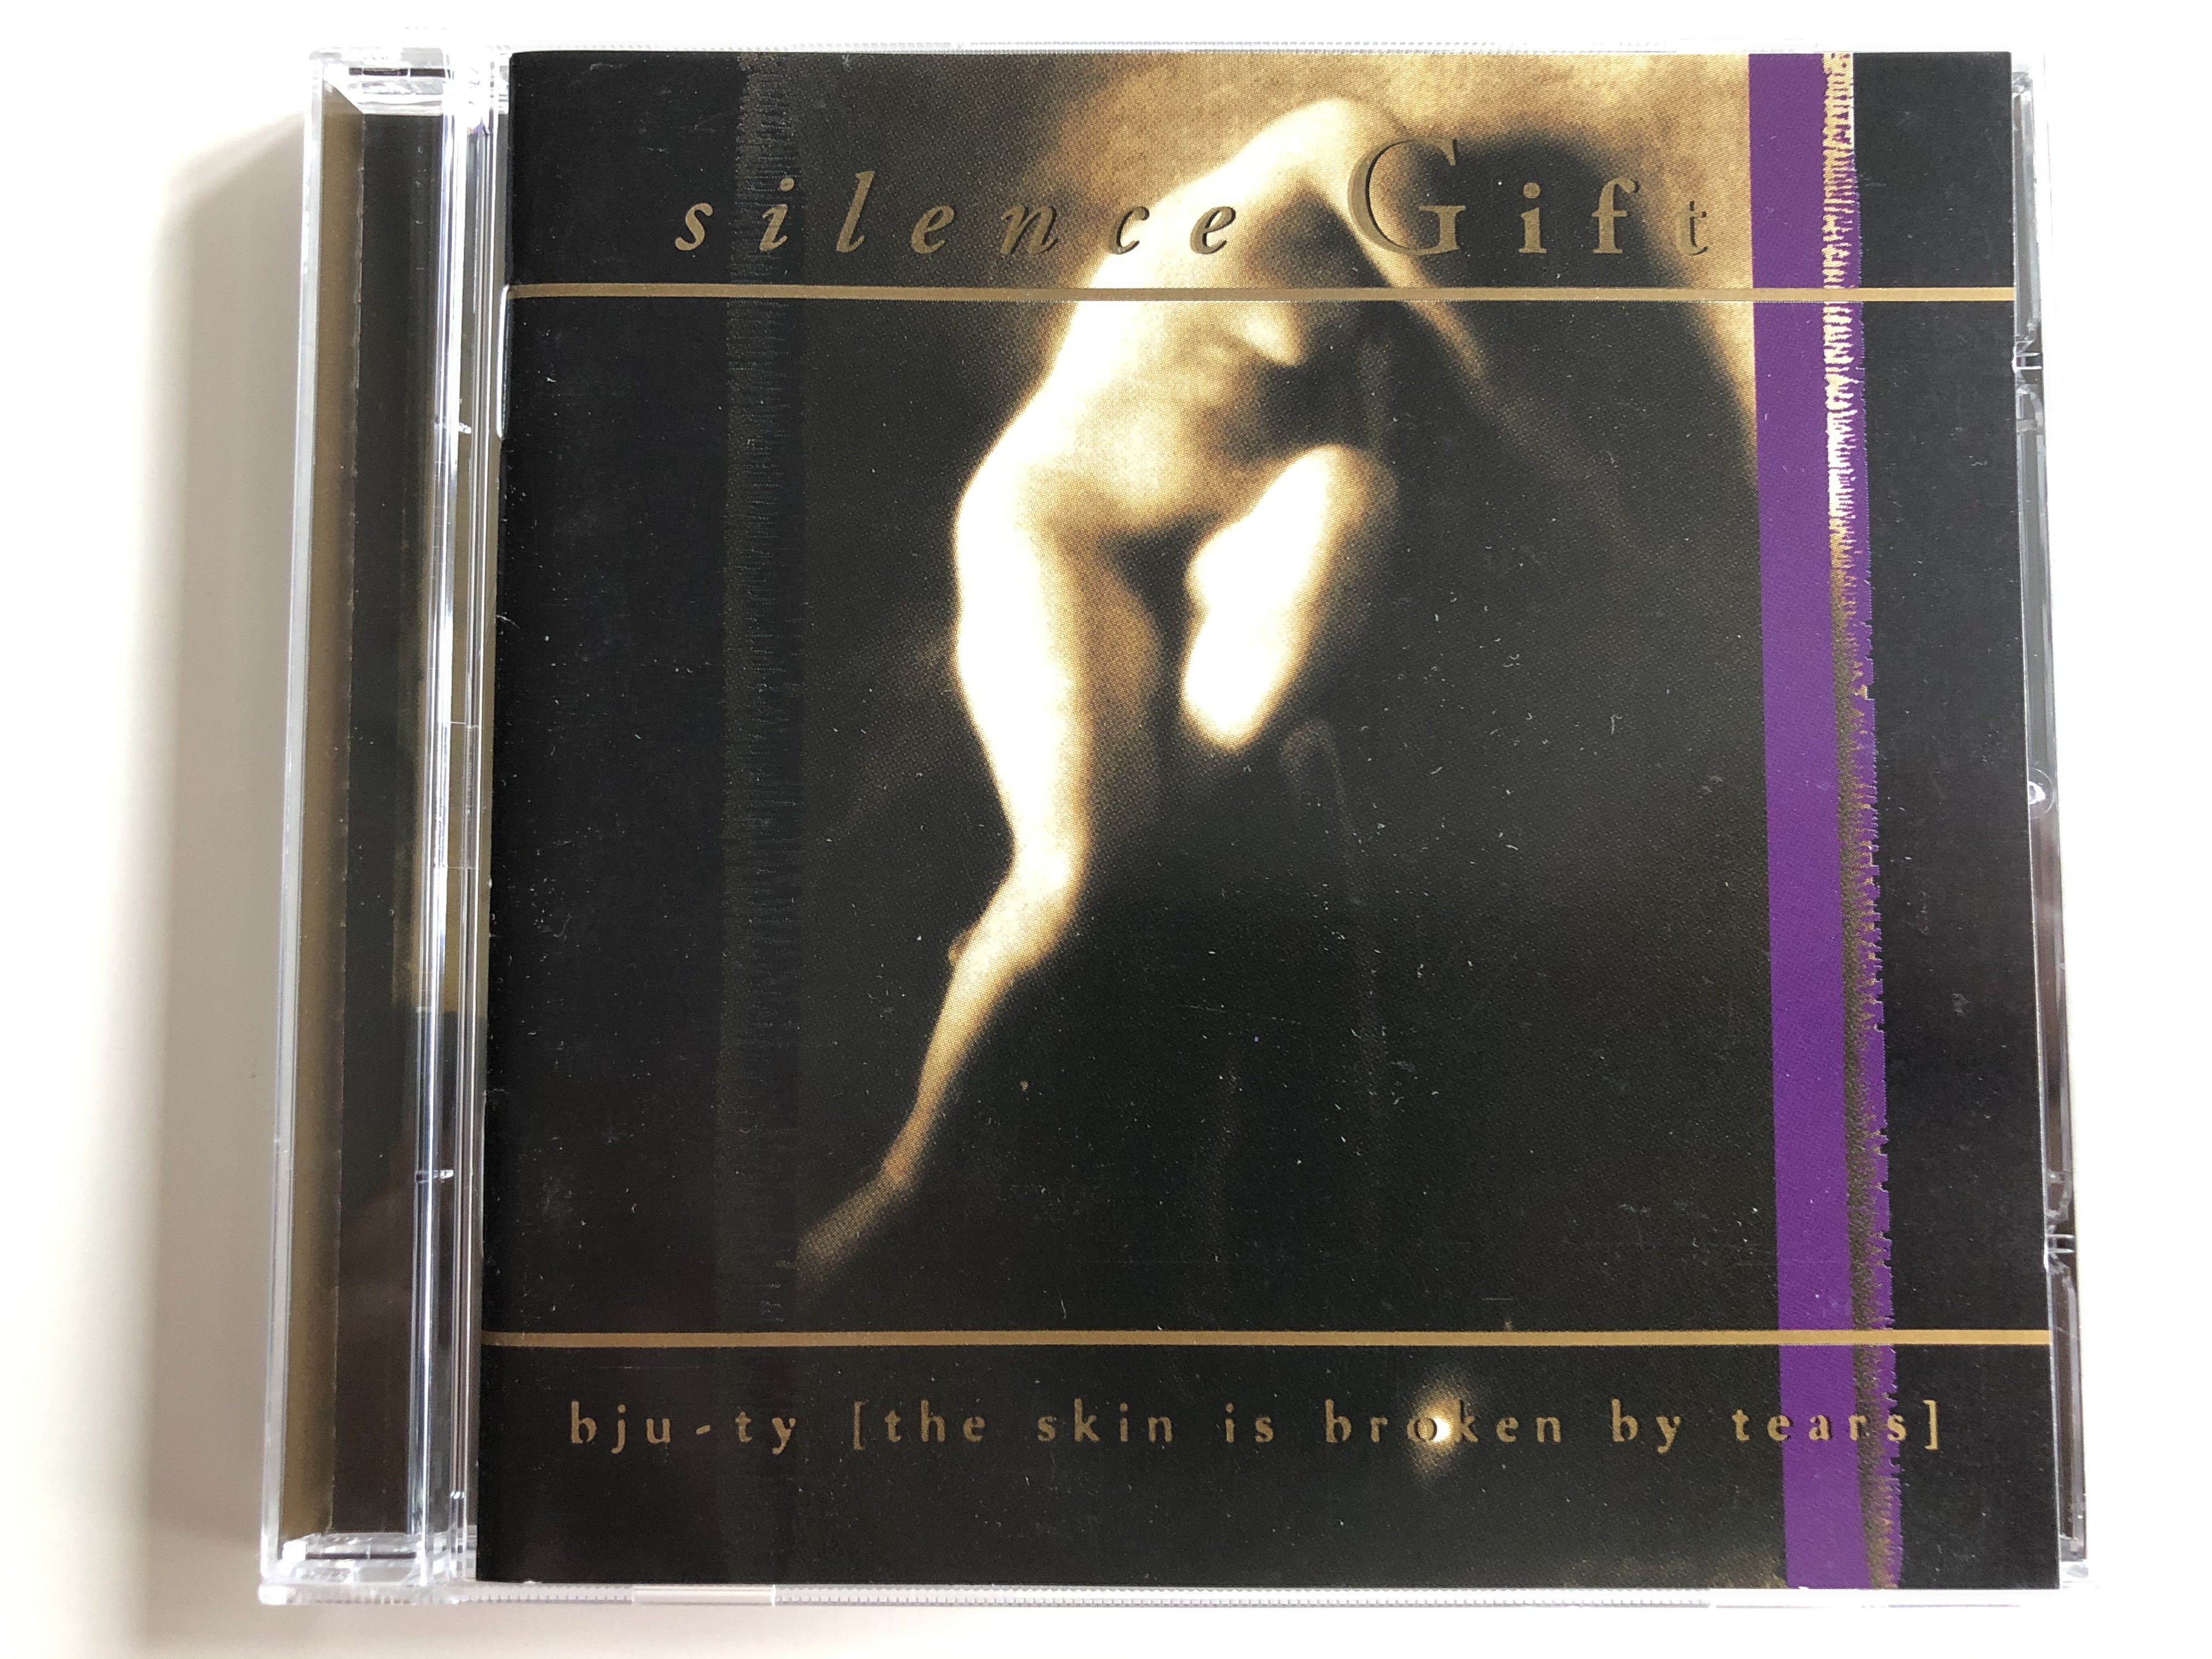 silence-gift-bju-ty-the-skin-is-broken-by-tears-hyperium-records-audio-cd-1994-39101002-42-1-.jpg